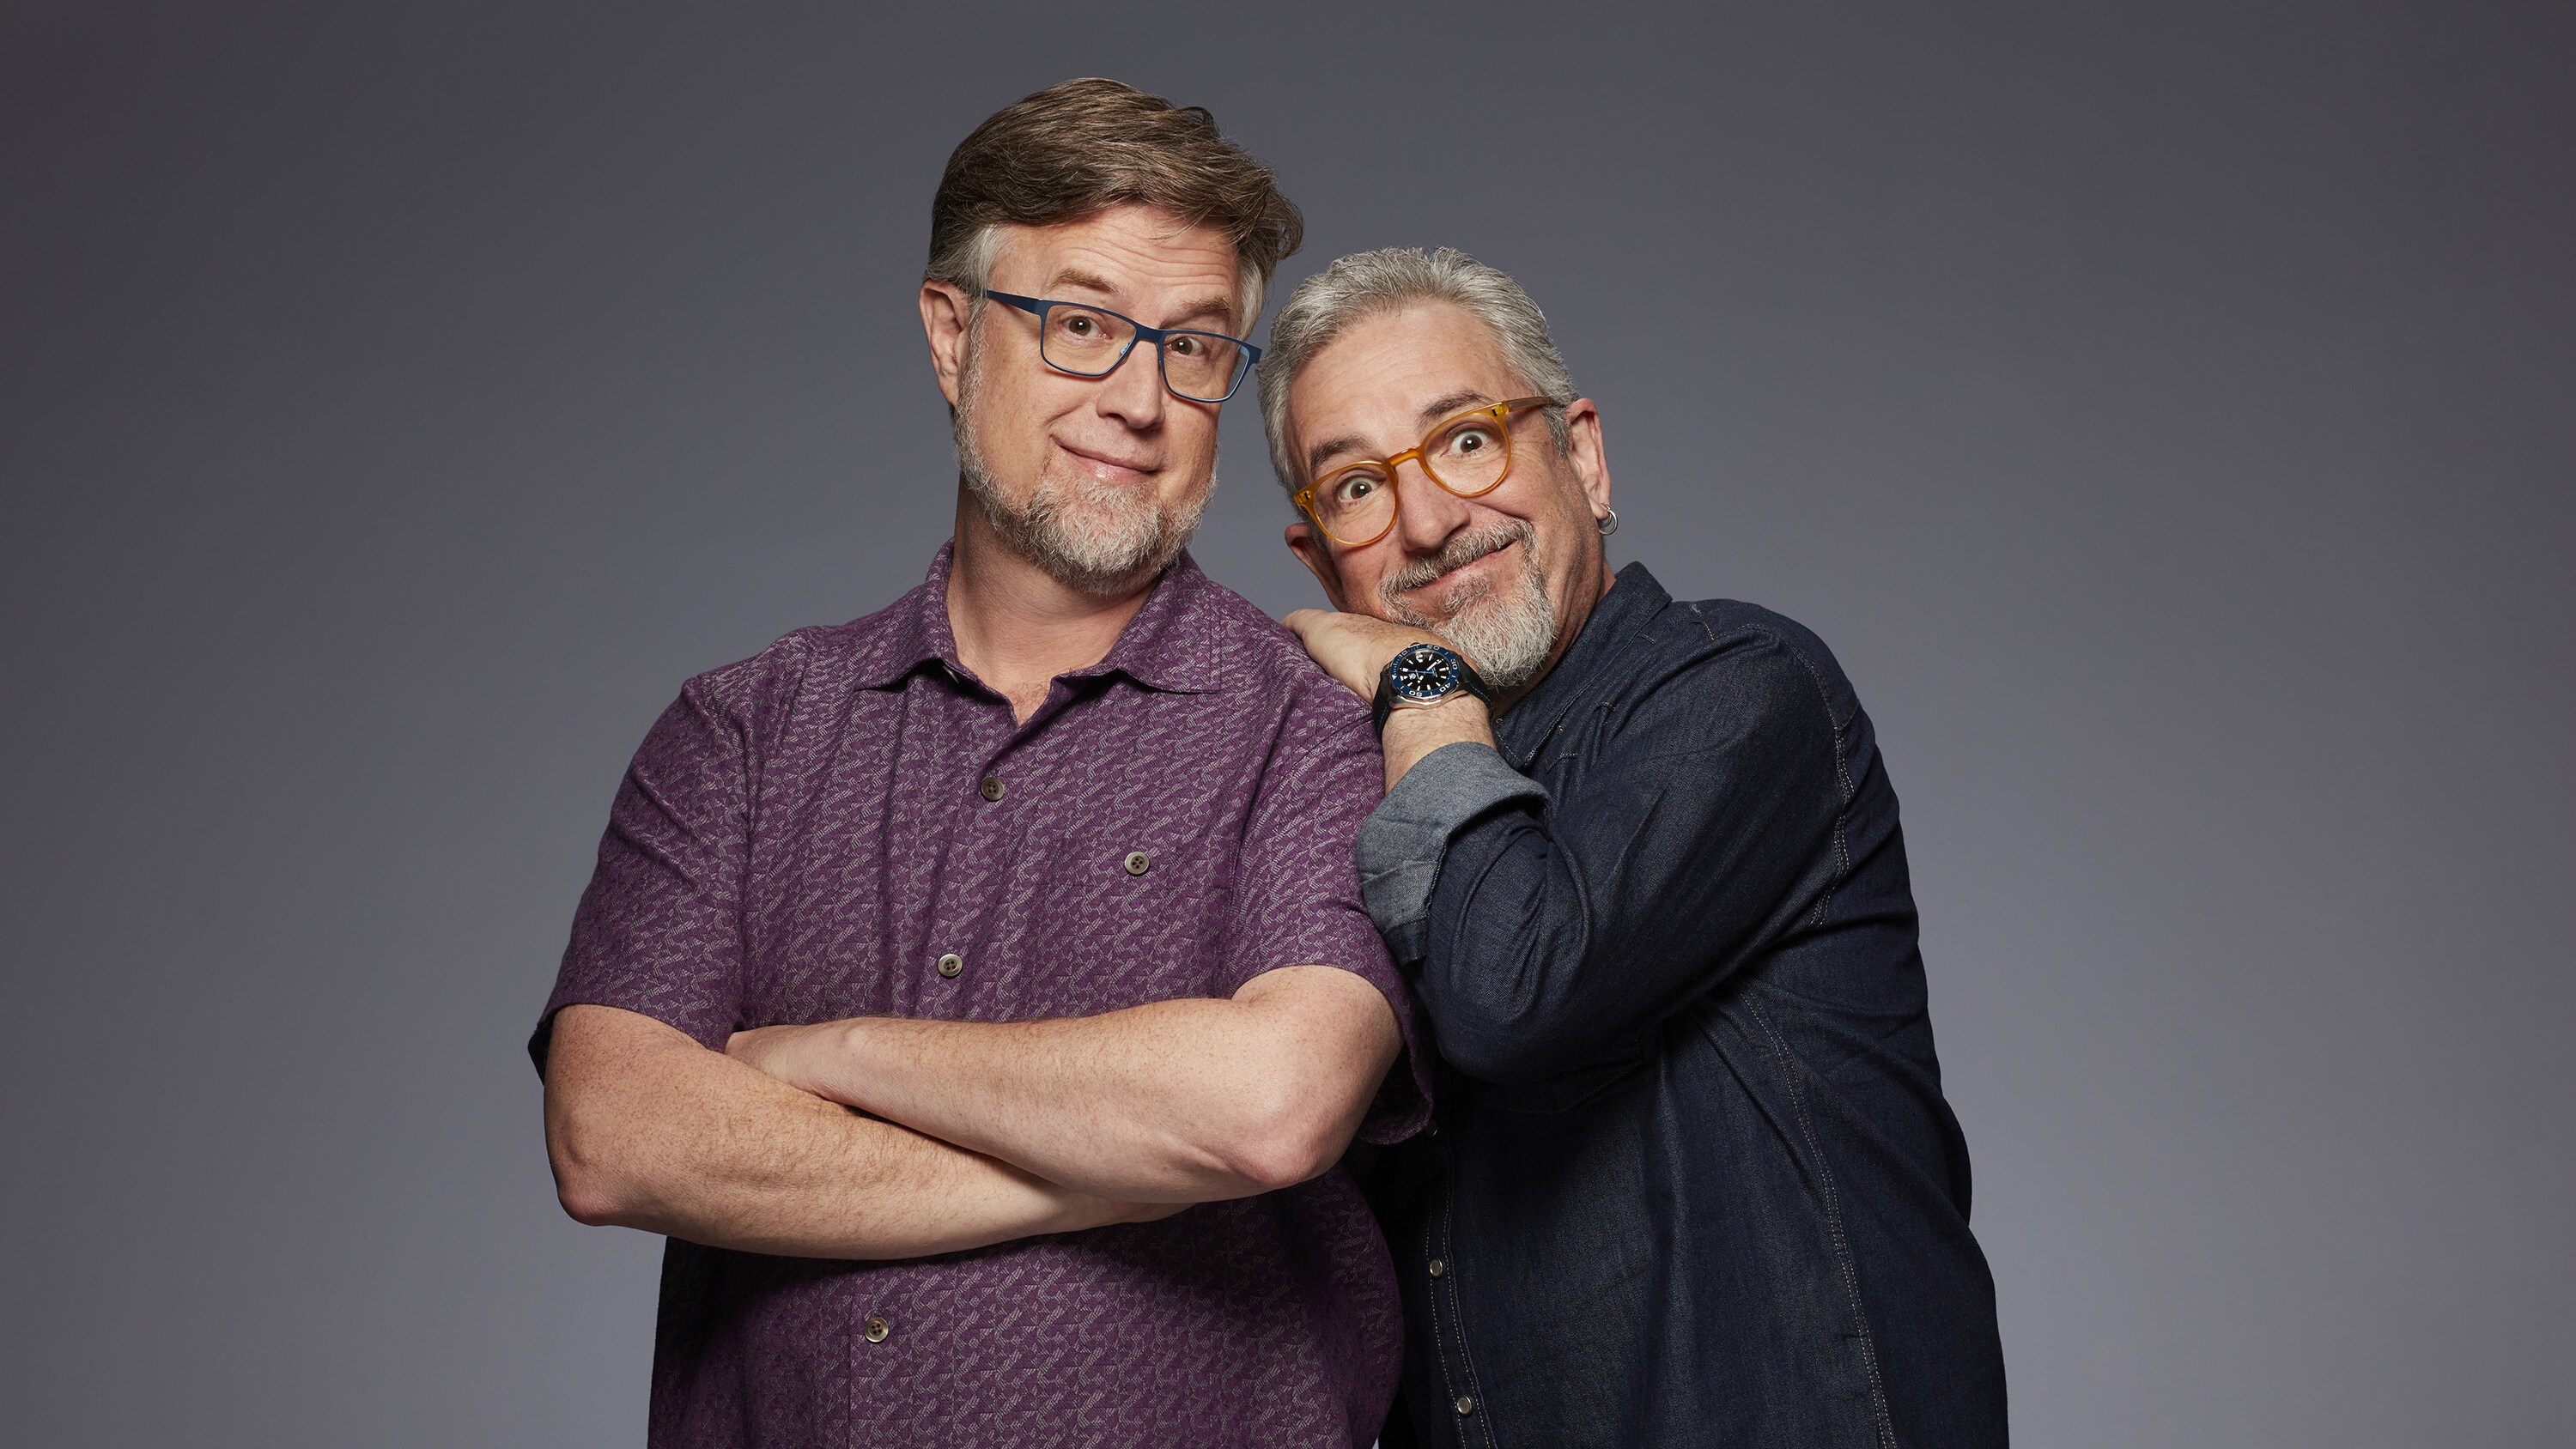 Dan Povenmire and Jeff "Swampy" Marsh, Creators/Executive Producers of Disney's "Phineas and Ferb The Movie: Candace Against The Universe". (Disney+/Craig Sjodin)